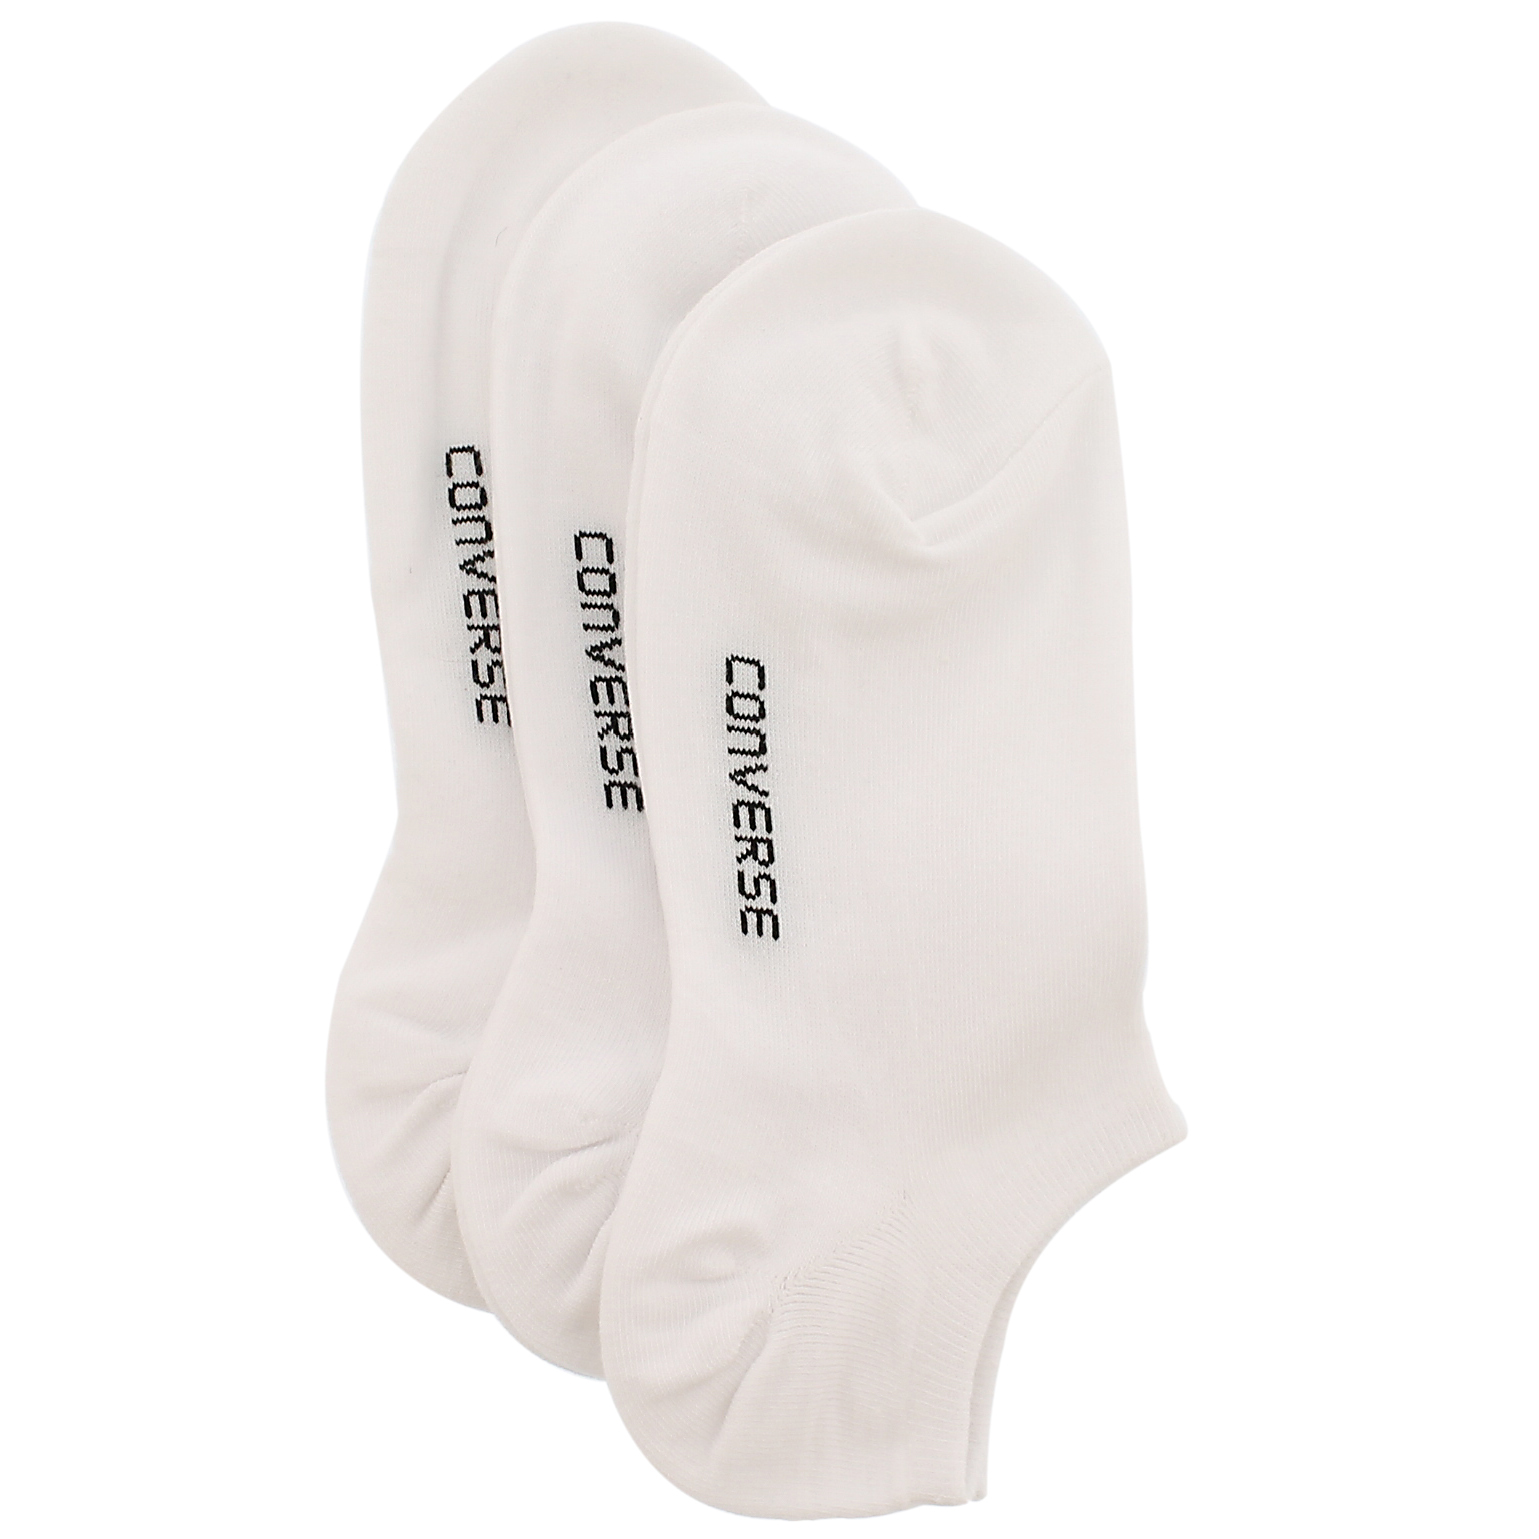 CONVERSE white ankle socks - | SoftMoc 